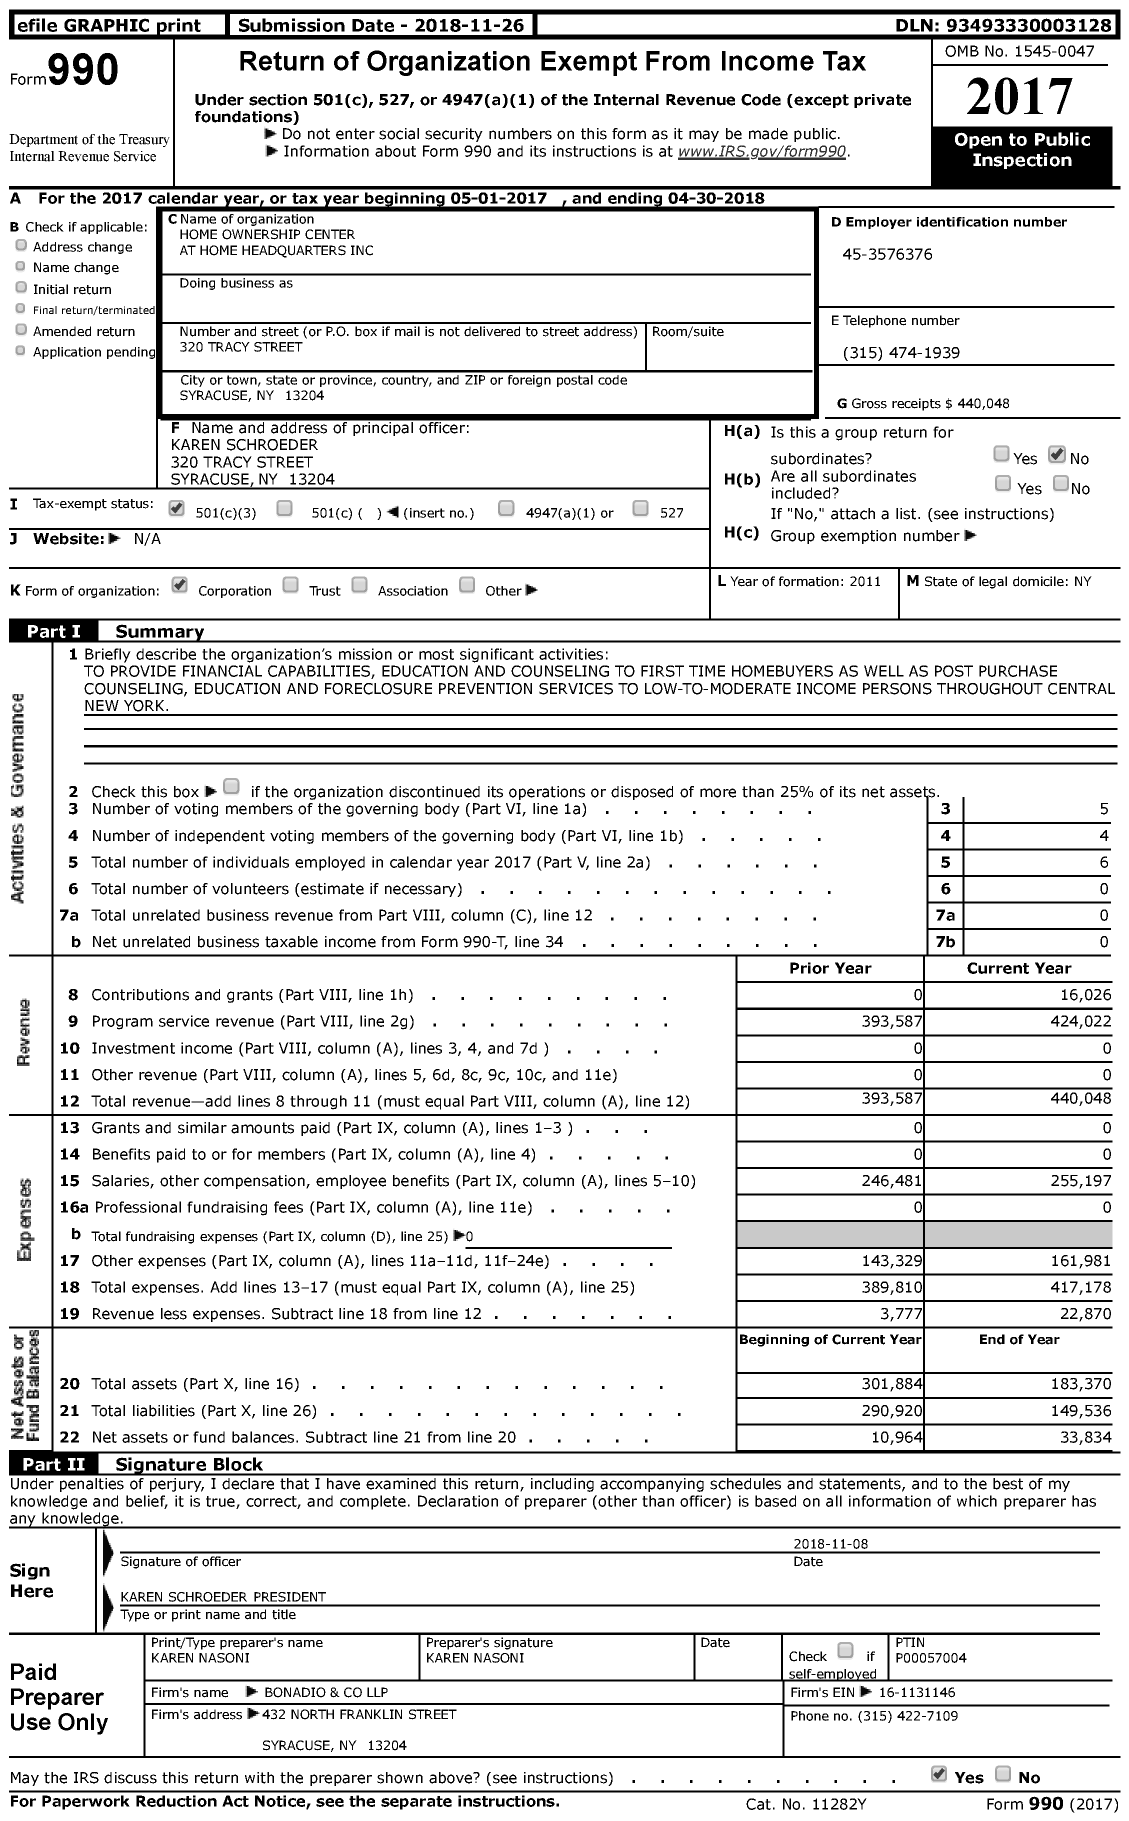 Image of first page of 2017 Form 990 for Home Ownership Center at Home Headquarters